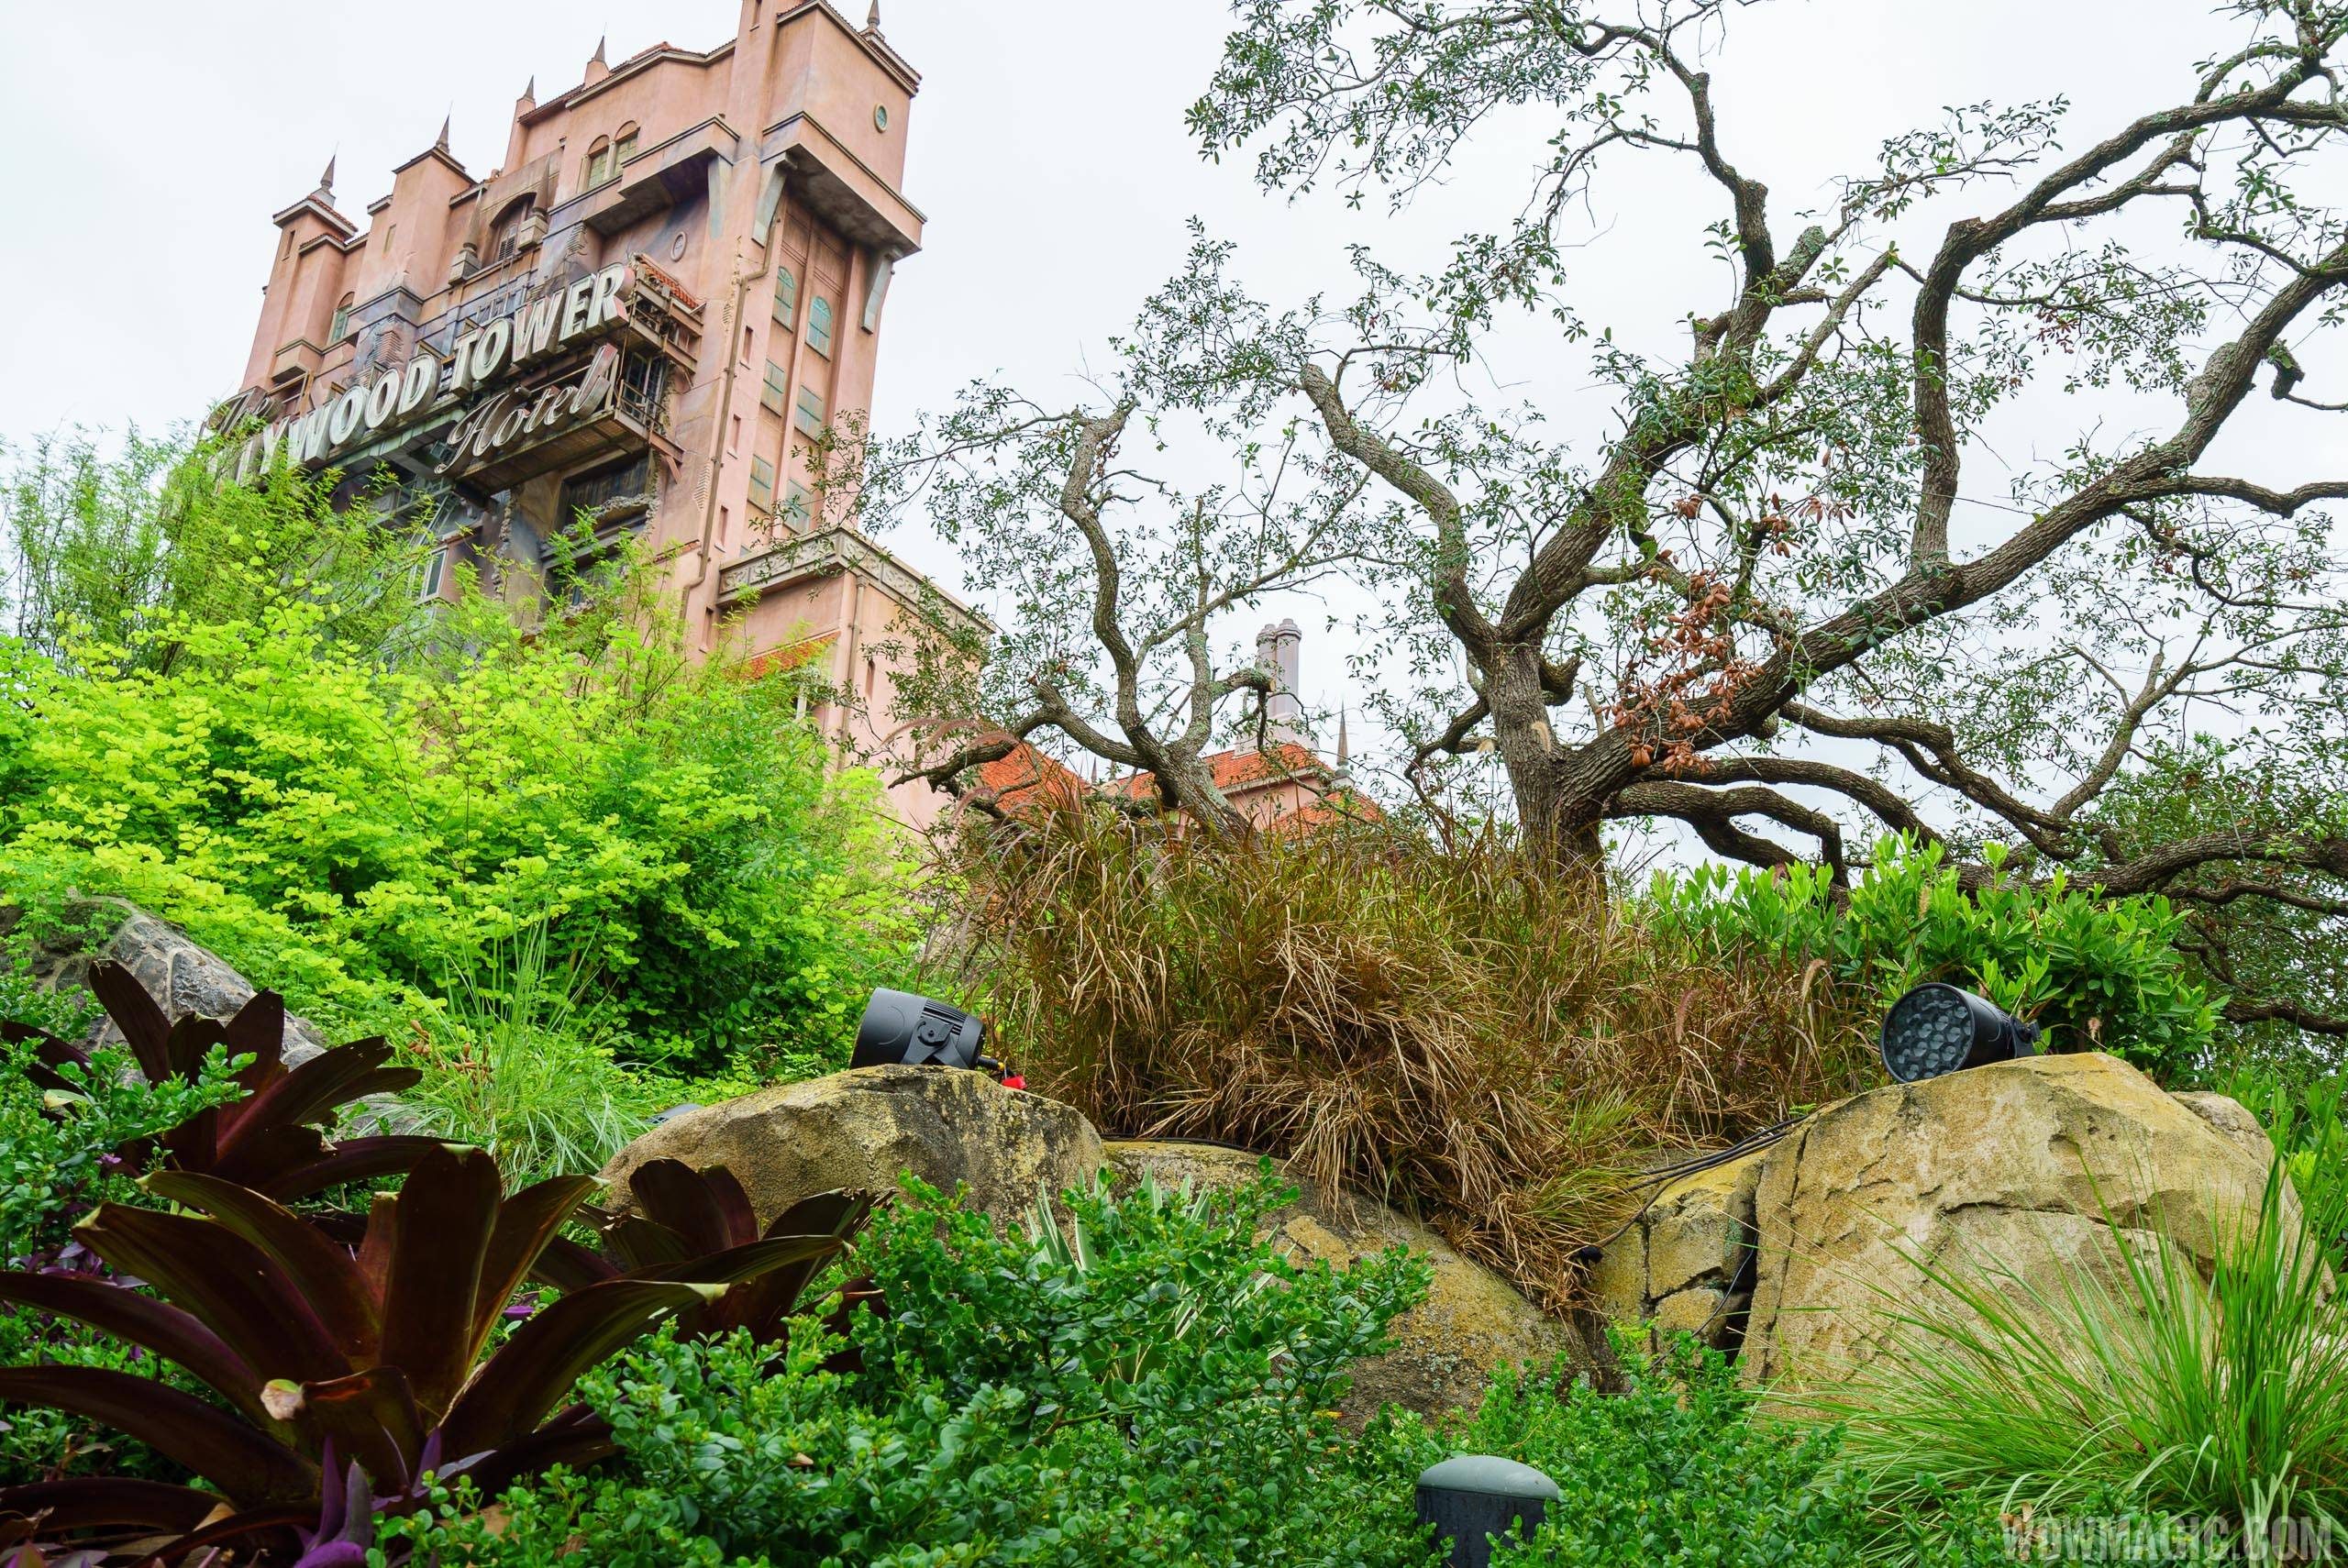 New lighting units around the Hollywood Tower Hotel